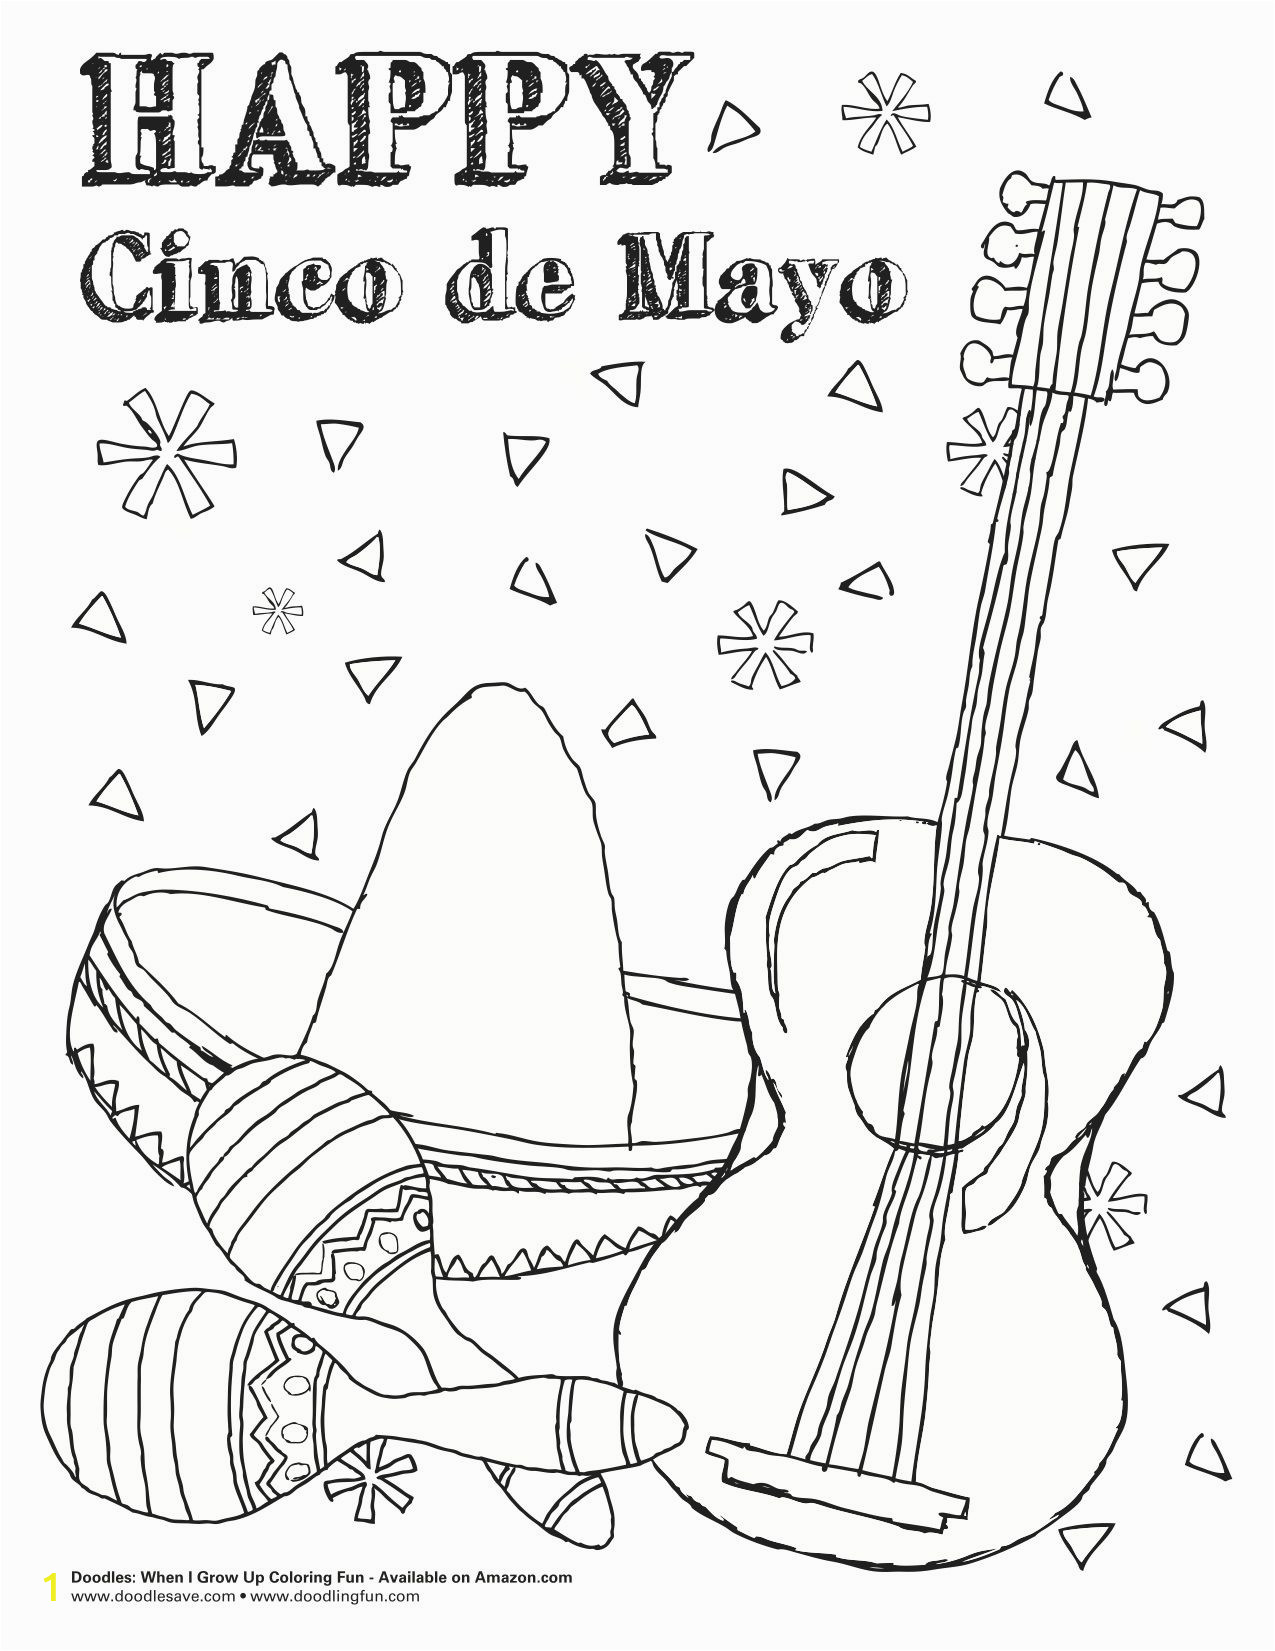 Coloring Pages for Cinco De Mayo Cinco De Mayo Coloring Pages with Images